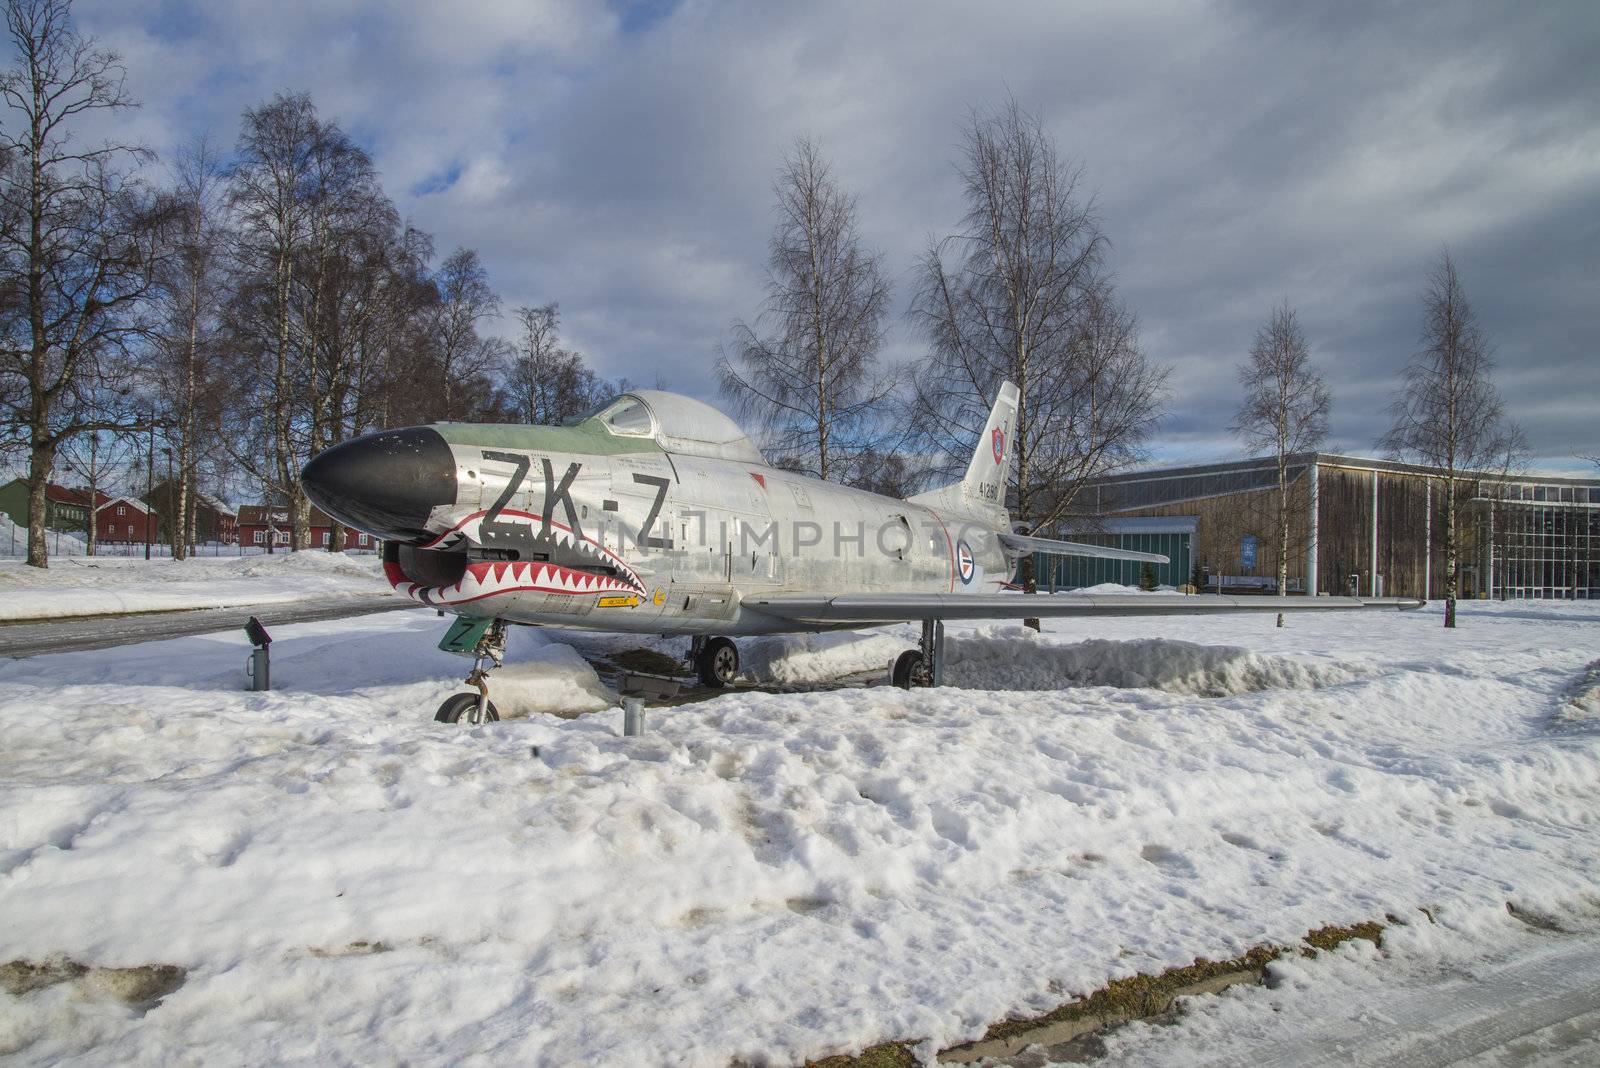 norwegian armed forces aircraft collection  is a military aviation museum located at gardermoen, north of oslo, norway, the pictures are shot in march 2013